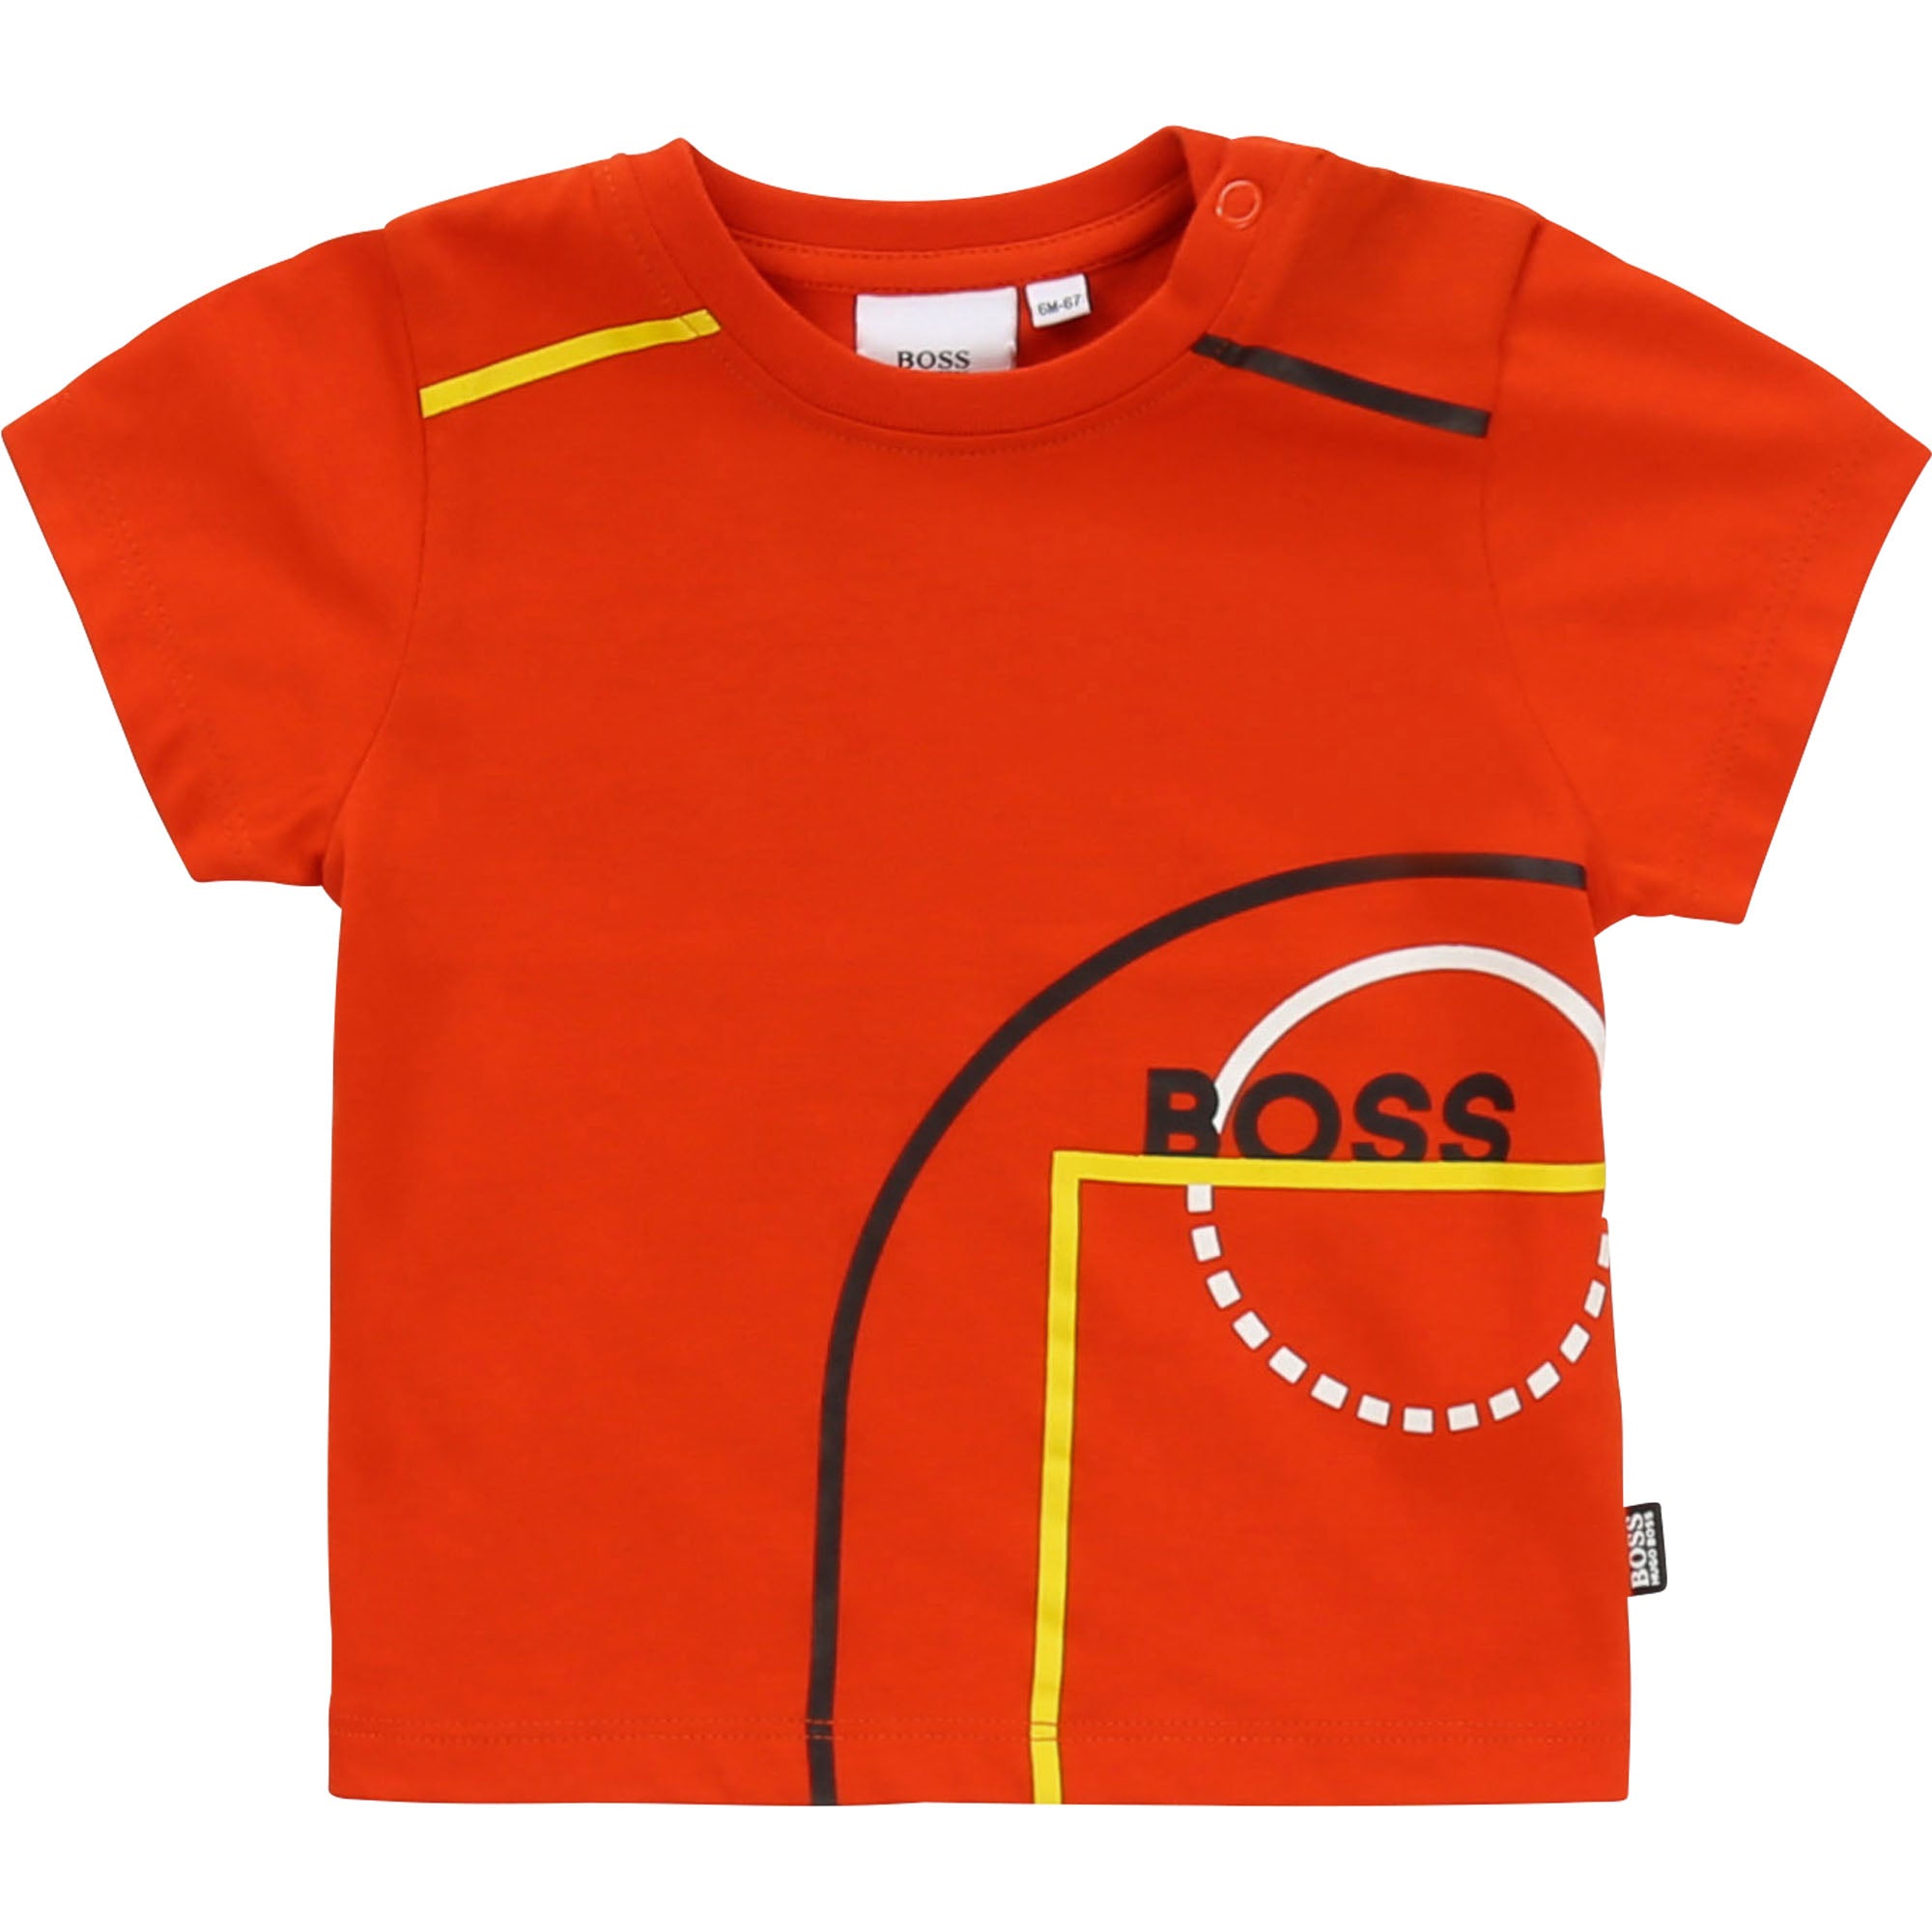 BABY SHORT SLEEVES TEE-SHIRT, BRIGHT RED - Cemarose Children's Fashion Boutique